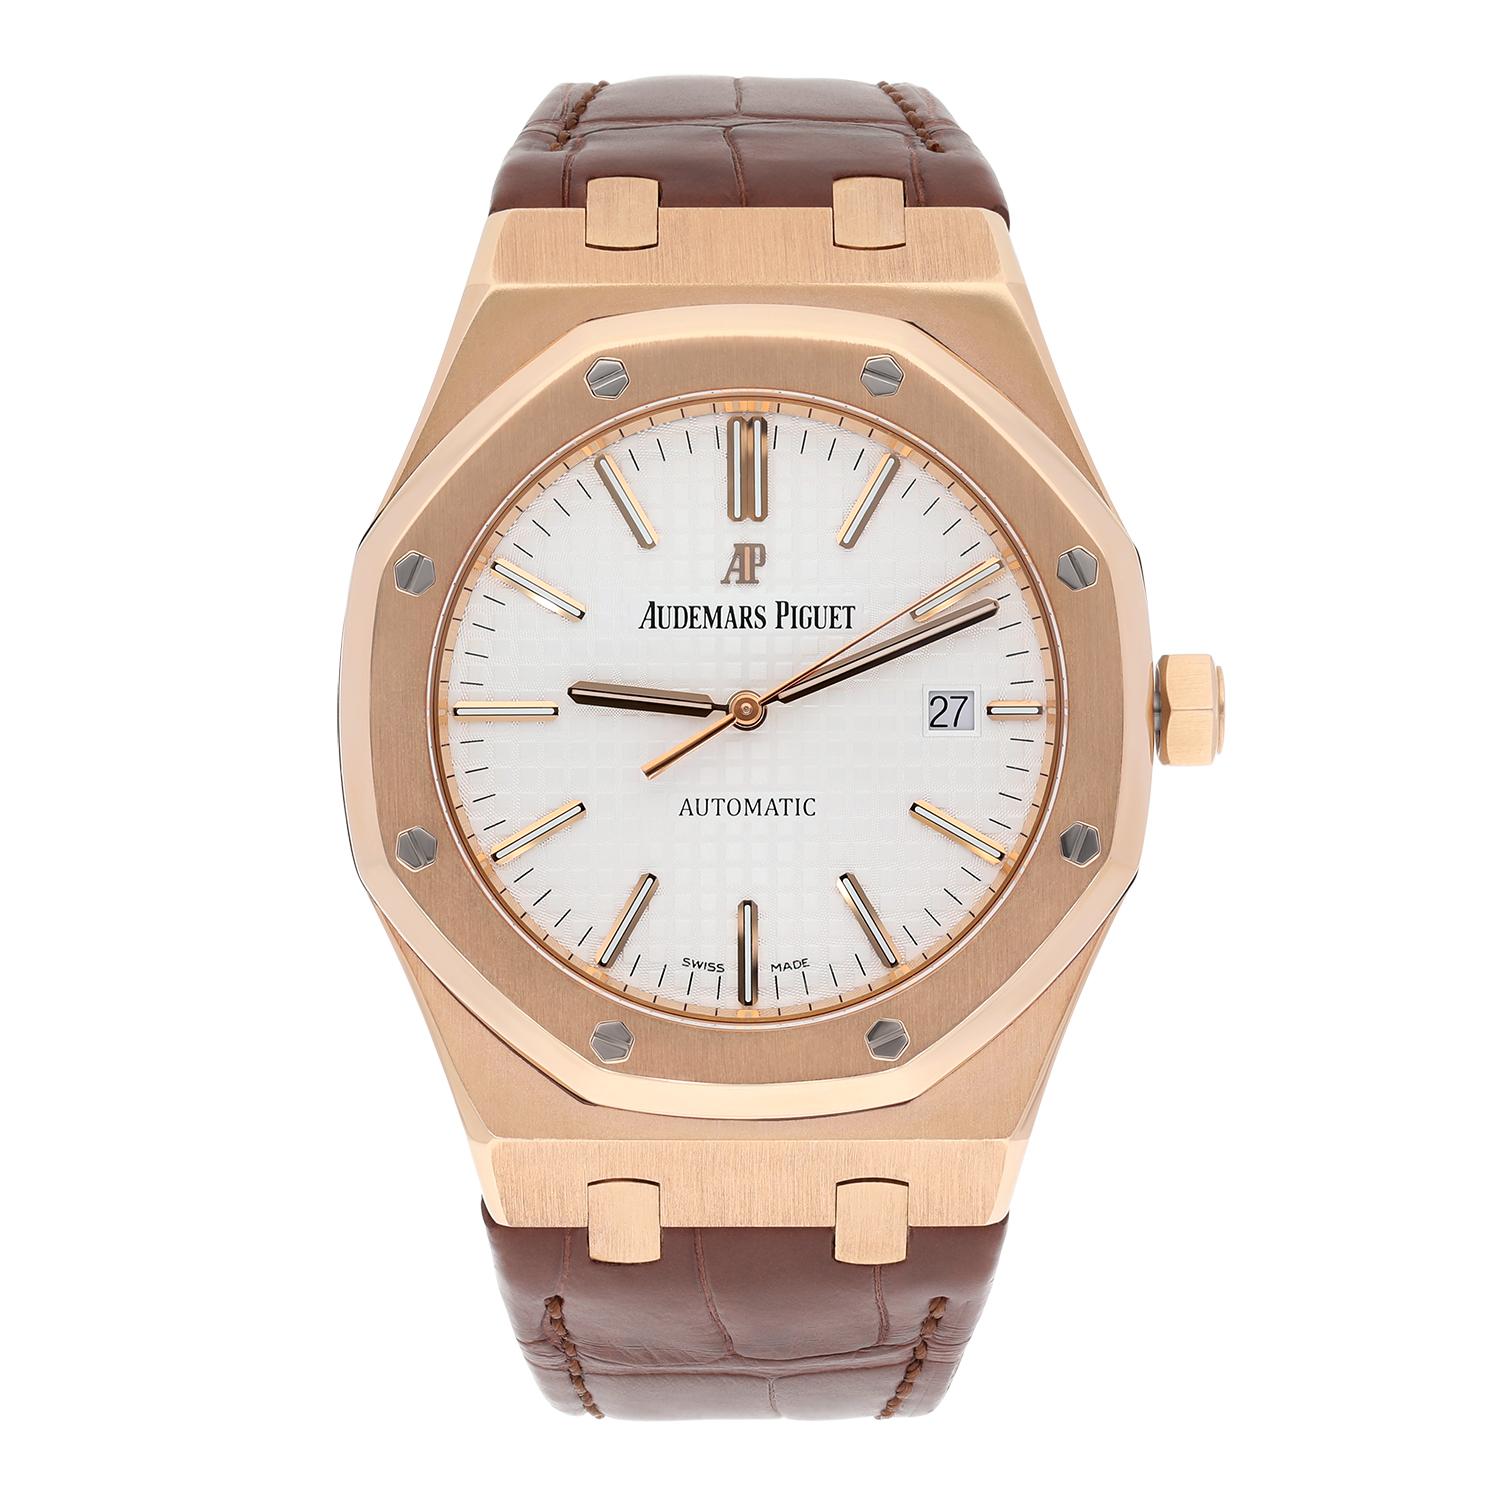 Audemars Piguet Royal Oak (15400OROOD088CR01) self-winding automatic watch, features a 41mm 18k rose gold case surrounding a silver Grande Tapisserie dial on a brand new brown alligator strap with an 18k rose gold deployant buckle. Functions include